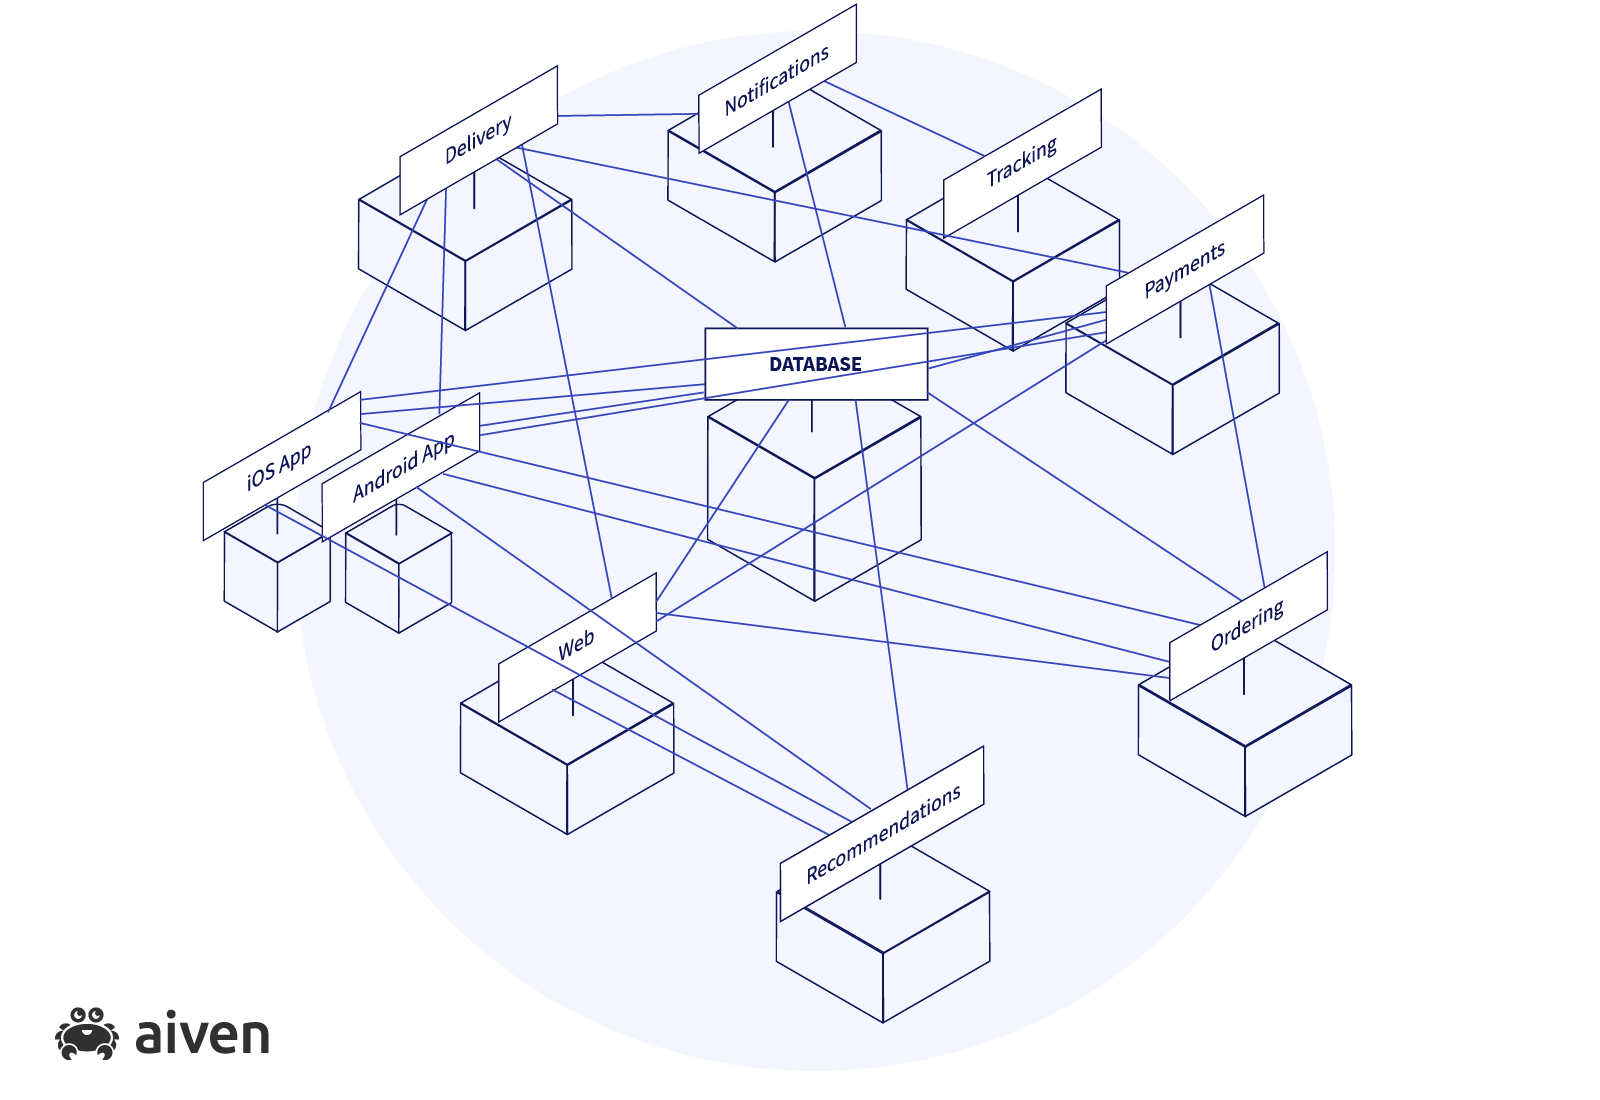 Diagram of a complex monolith - a database is connected to lots of services, which in turn are connected to each other. It's impossible to make sense of this diagram